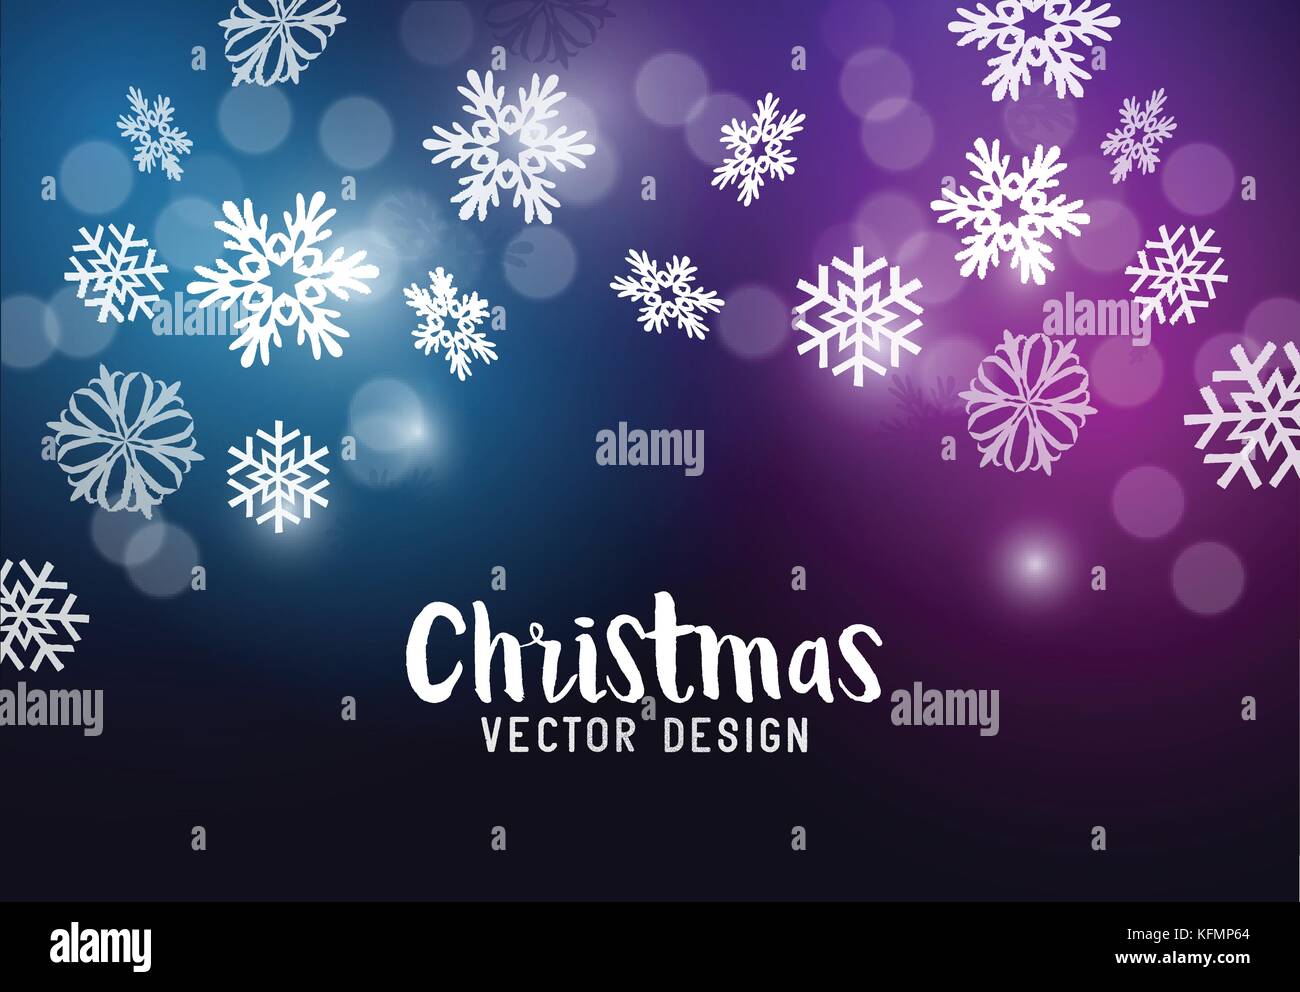 Christmas background with falling snowflakes. Vector illustration. Stock Vector